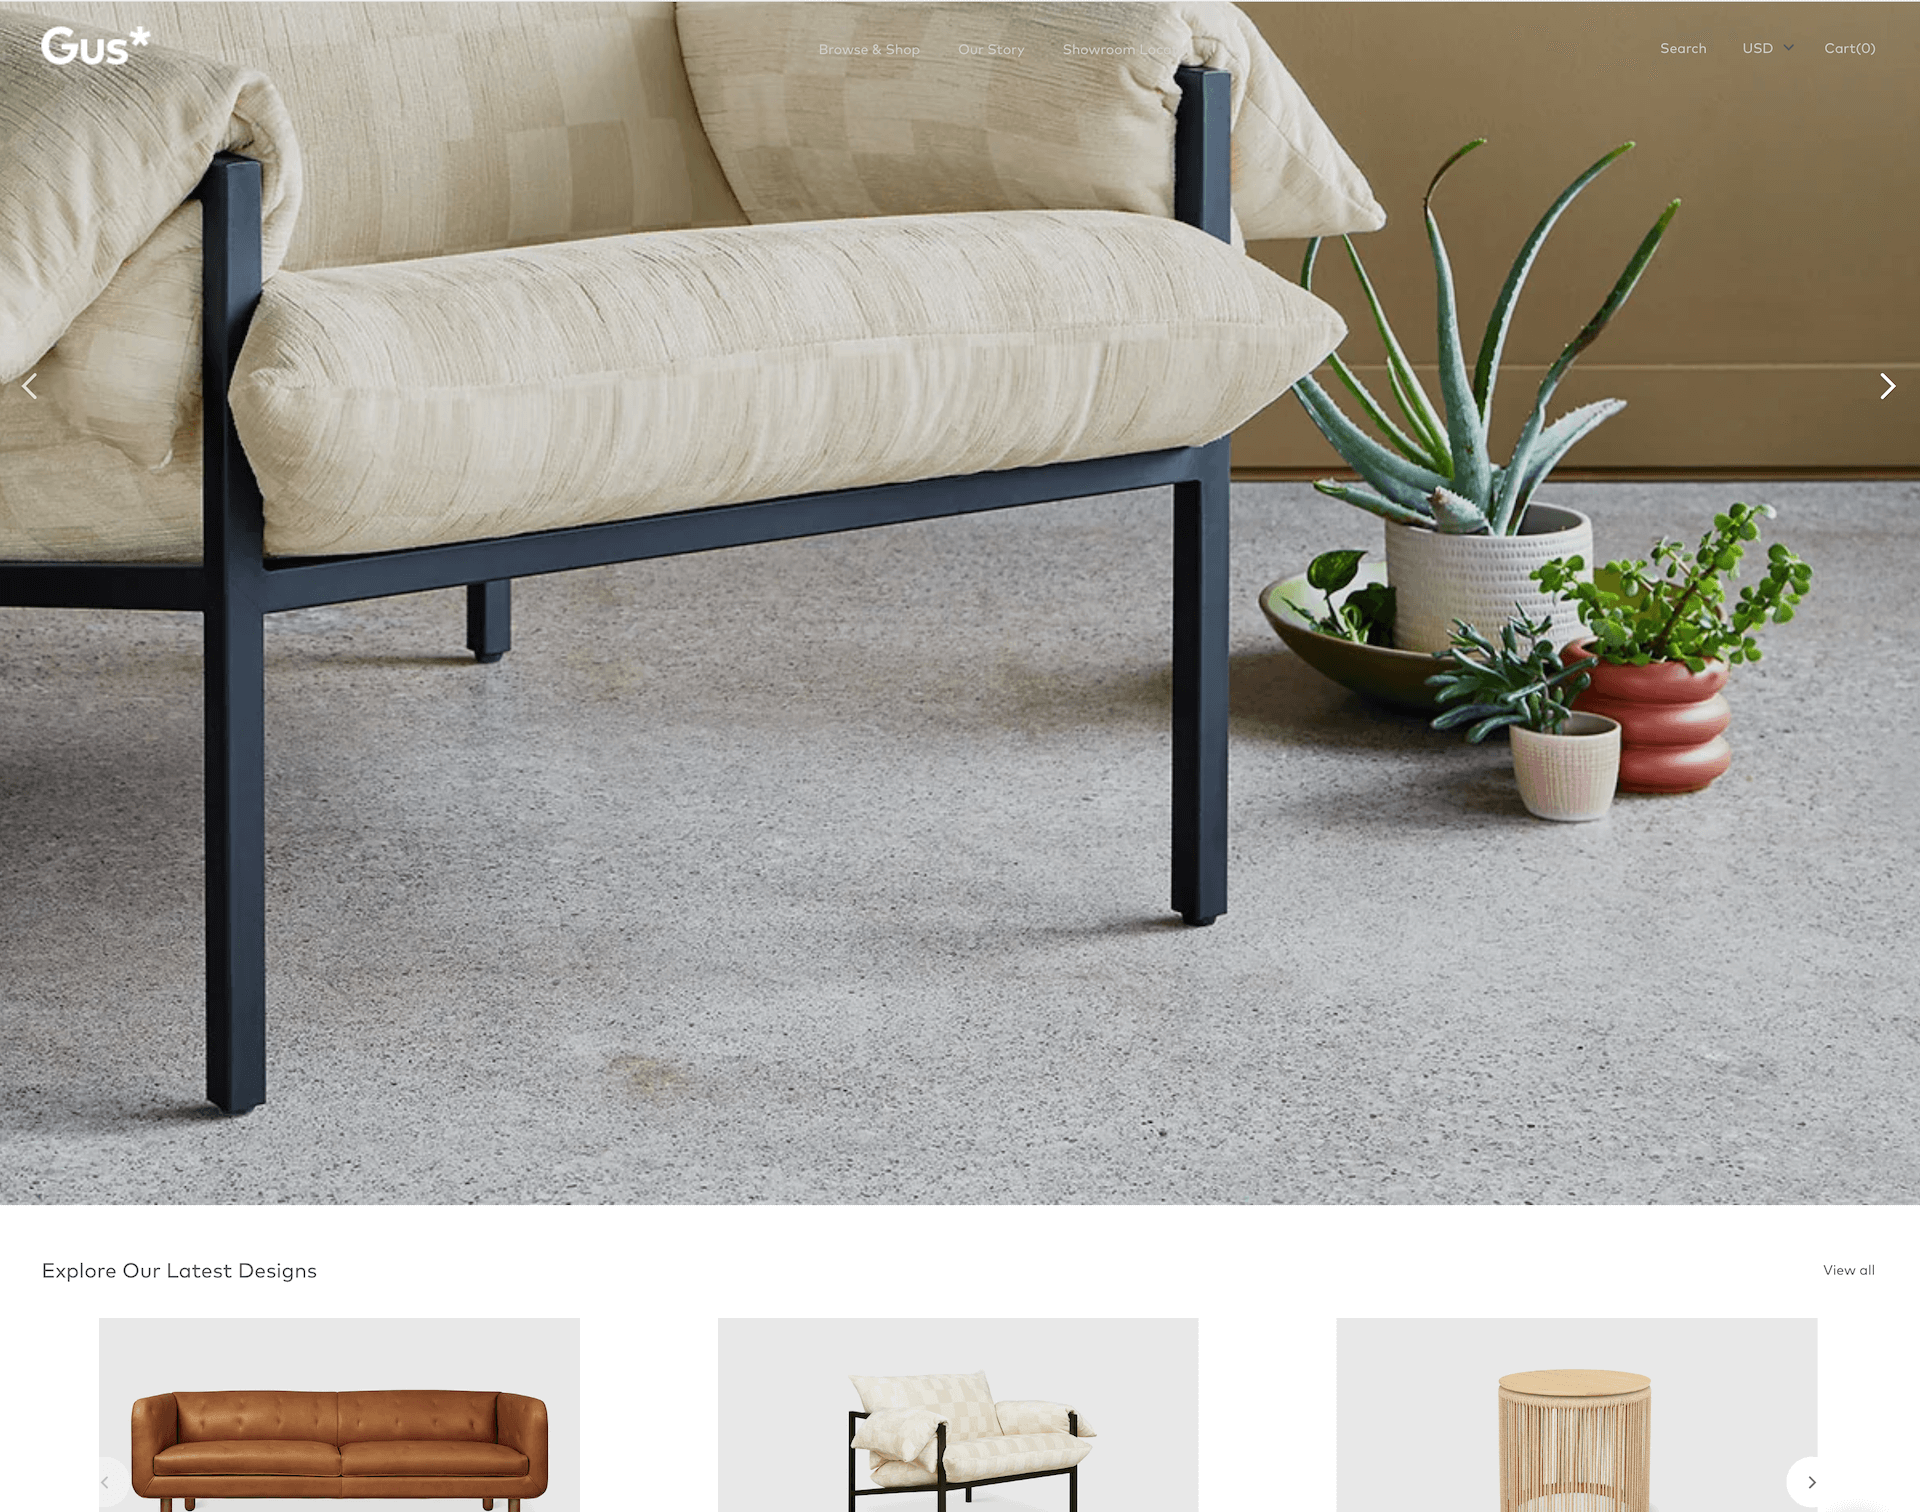 Gus furniture website with a large hero image and a transparent menu bar that reduces contrast between text and background